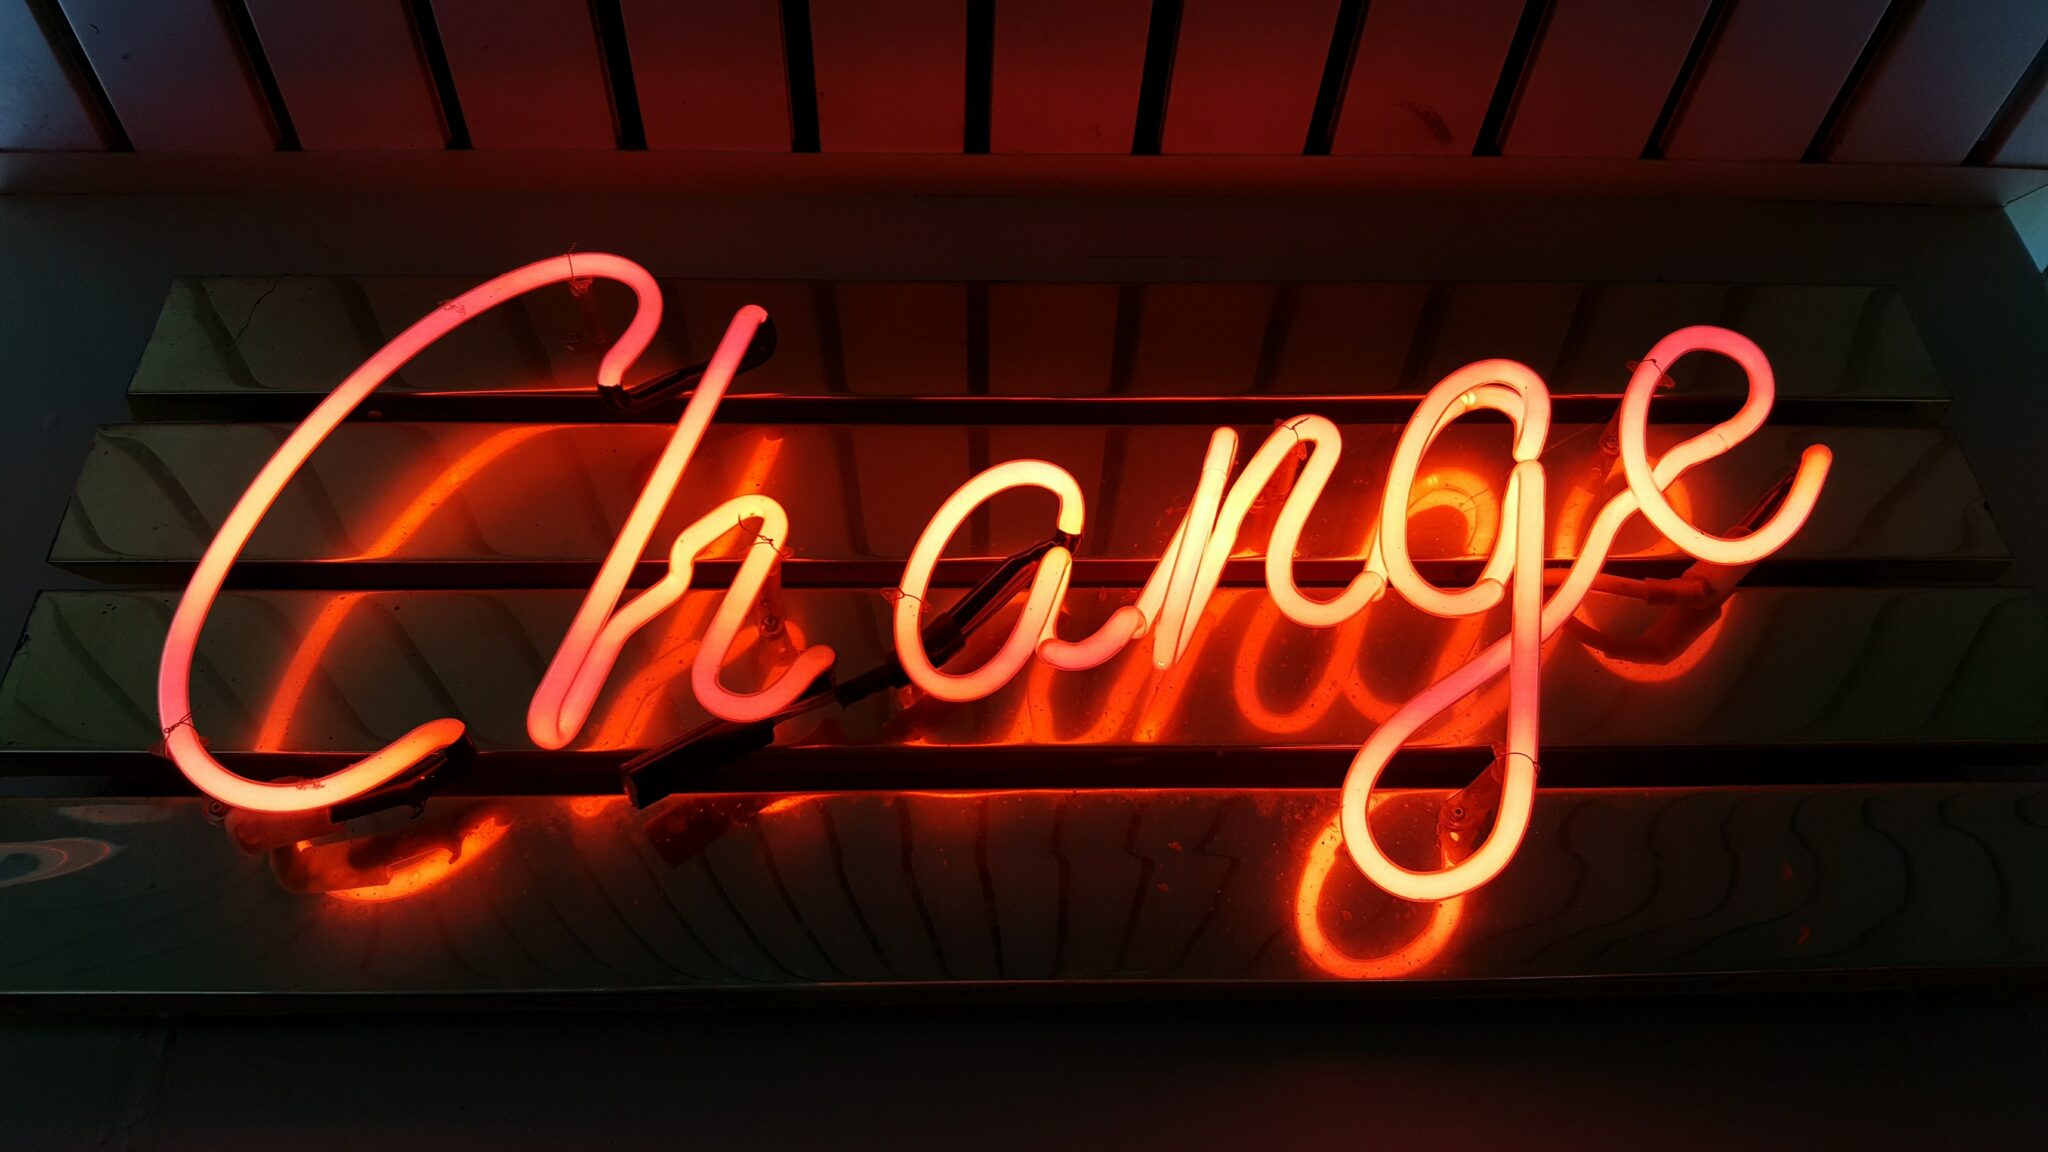 Neon sign with the word "Change"